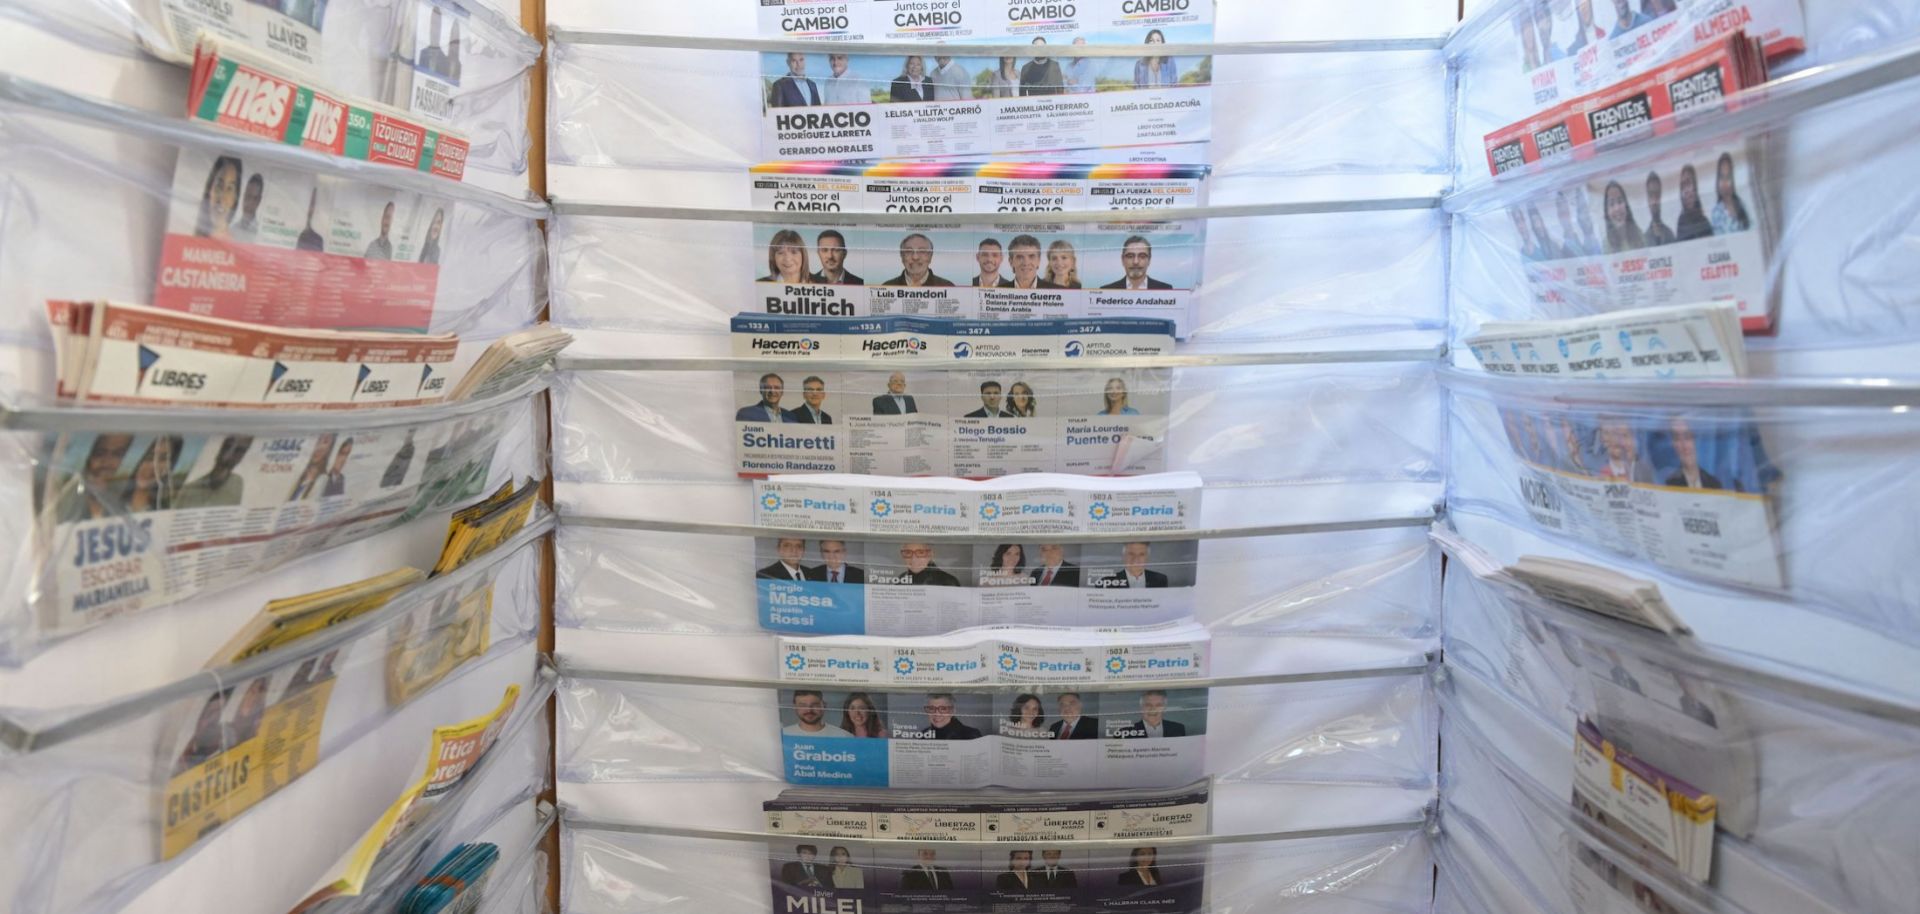 Electoral material is pictured at a polling station during primary elections in Buenos Aires, Argentina, on Aug. 13, 2023.